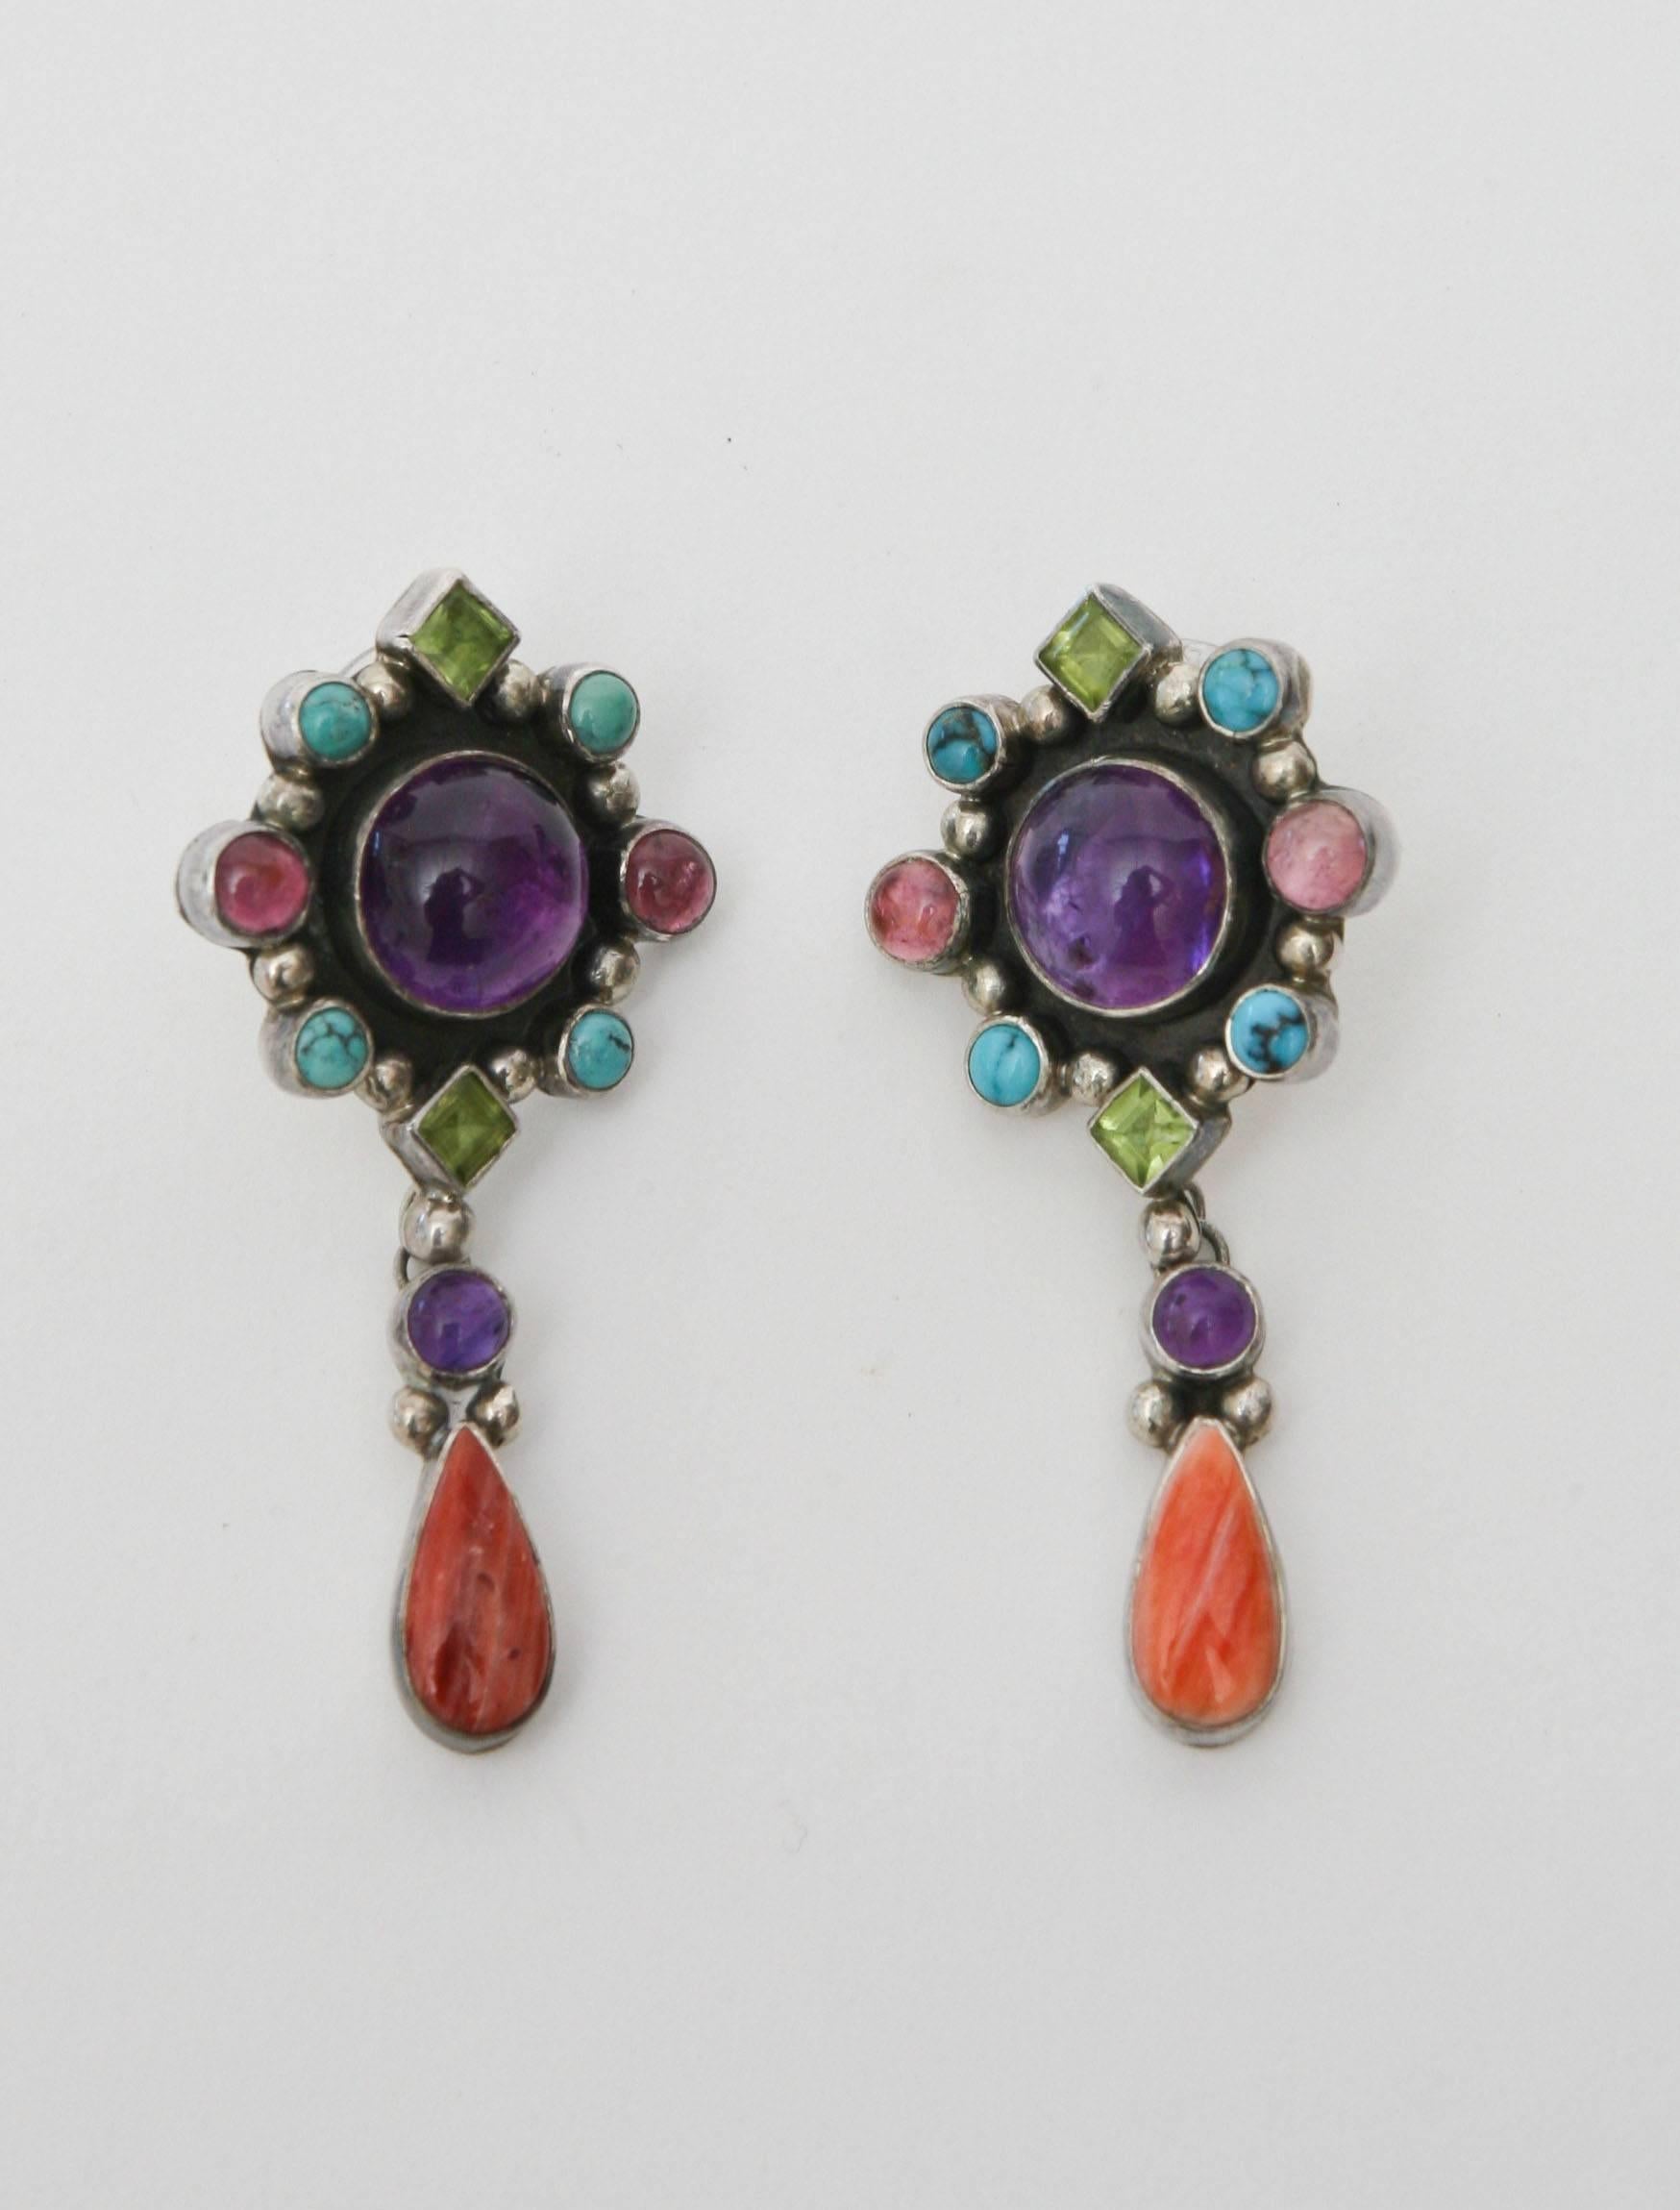 These lovely pair of earrings have all the beautiful stones of coral, turquoise, citrine, amethyst and tourmaline set against sterling silver.
They are beautiful on the ear and now perfect for all the summer colors and all seasons.
The only